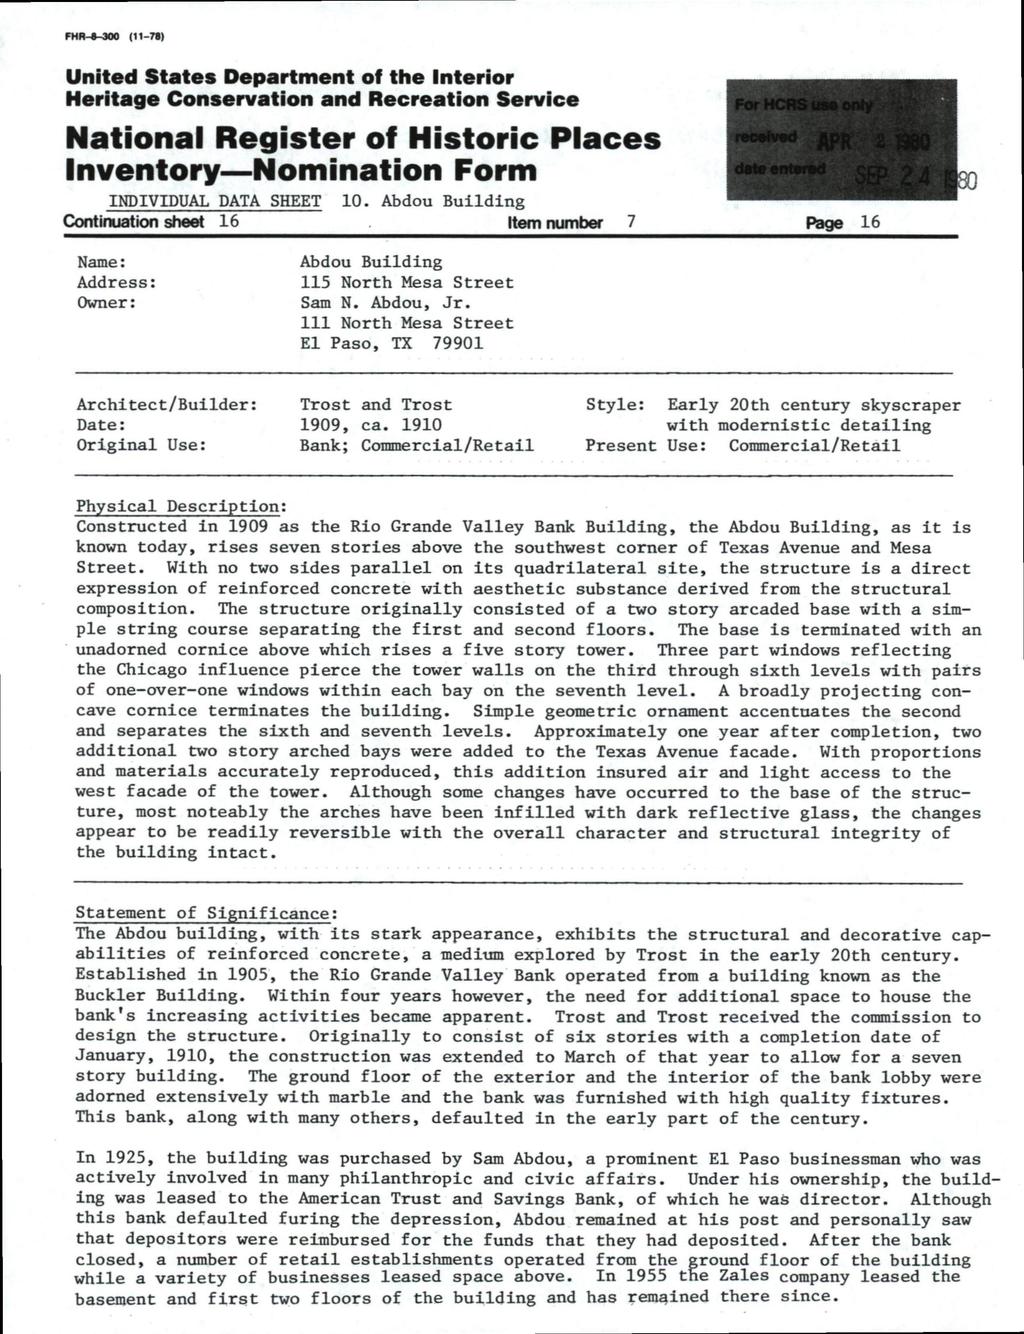 FHR-S-300 (11-7«) United States Department of the Interior Heritage Conservation and Recreation Service National Register off Historic Places Inventory Nomination Form INDIVIDUAL DATA SHEET 10.